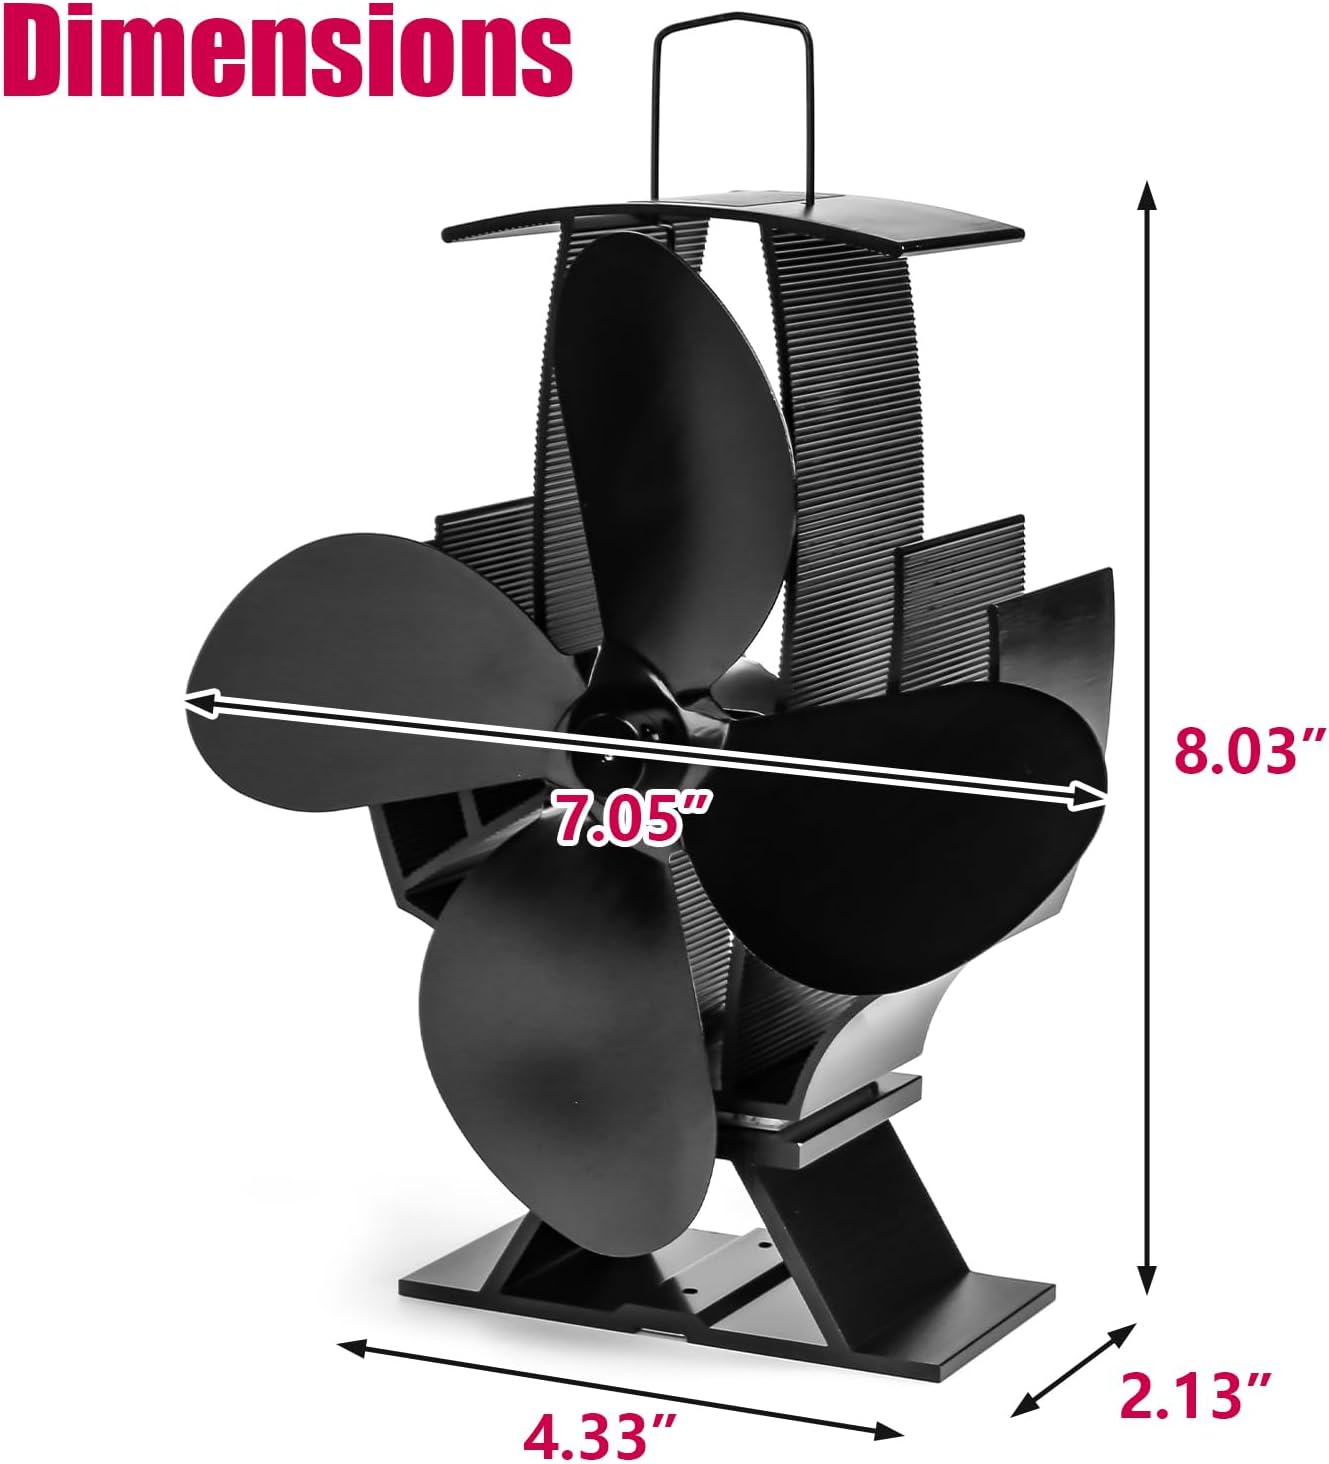 4 Blades Heat Powered Stove Fan for Wood Stove/Log Burner/Fireplace/Bu –  GrillPartsReplacement - Online BBQ Parts Retailer